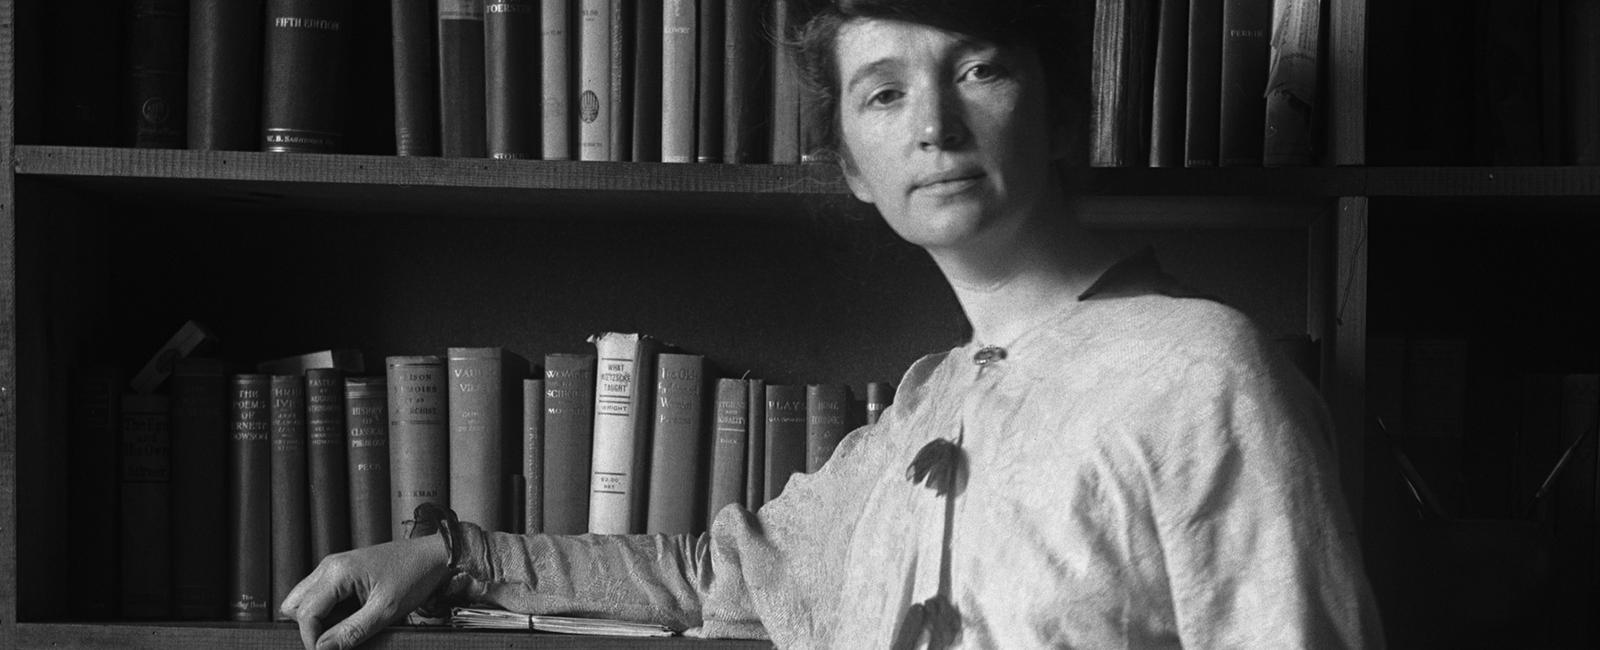 In 1917 margaret sanger was jailed for one month for establishing the first birth control clinic